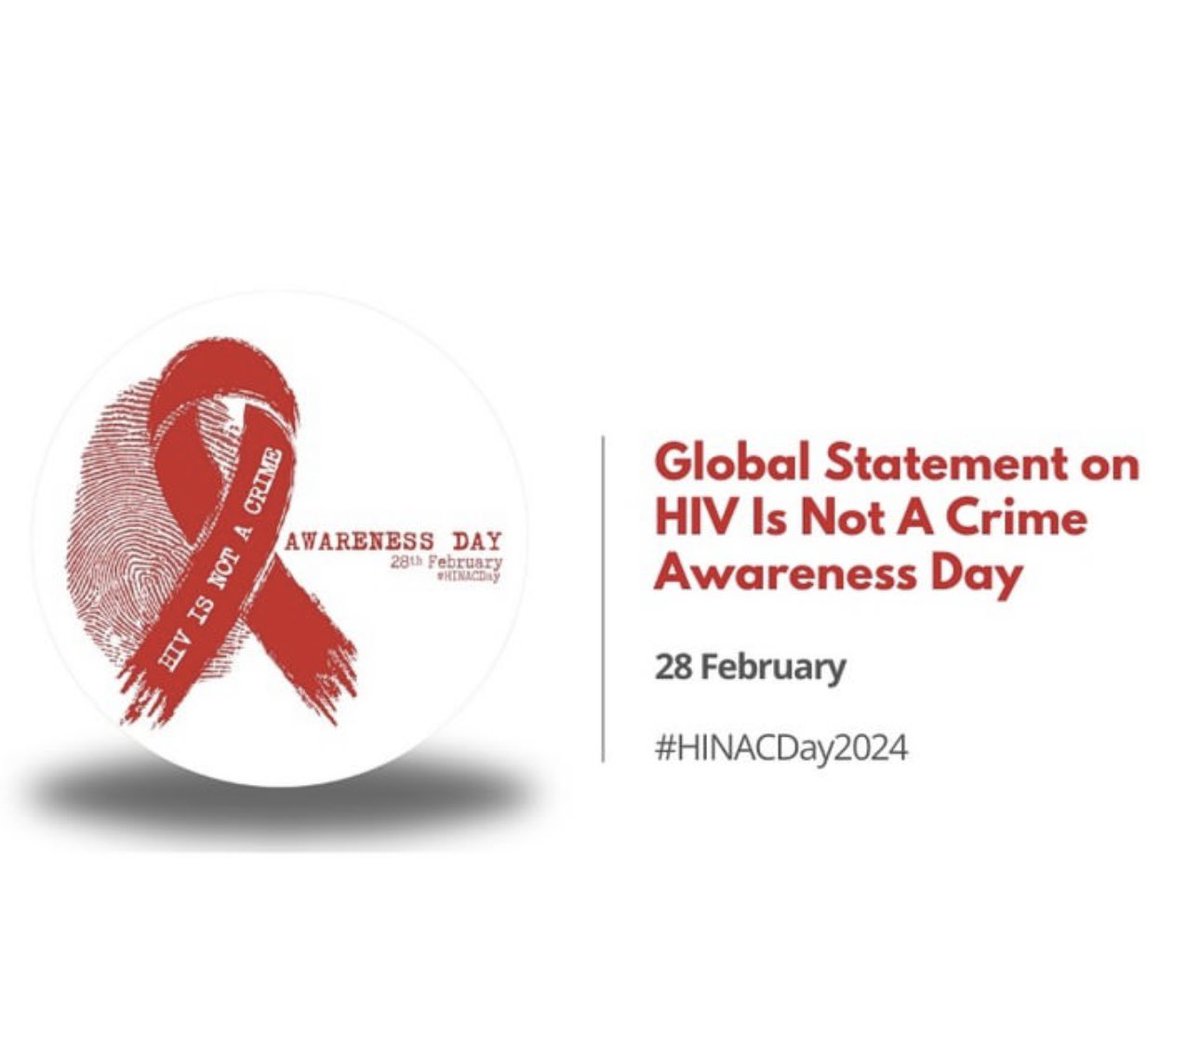 Join us in saying no to HIV criminalization and yes to justice, compassion and solidarity. #HINACDay2024. Read the #HINACDay2024 Global statement here 📍 gnpplus.net/latest/news/gl… @gnpplus @_ARASAcomms @HIVJusticeNet @w4_gf